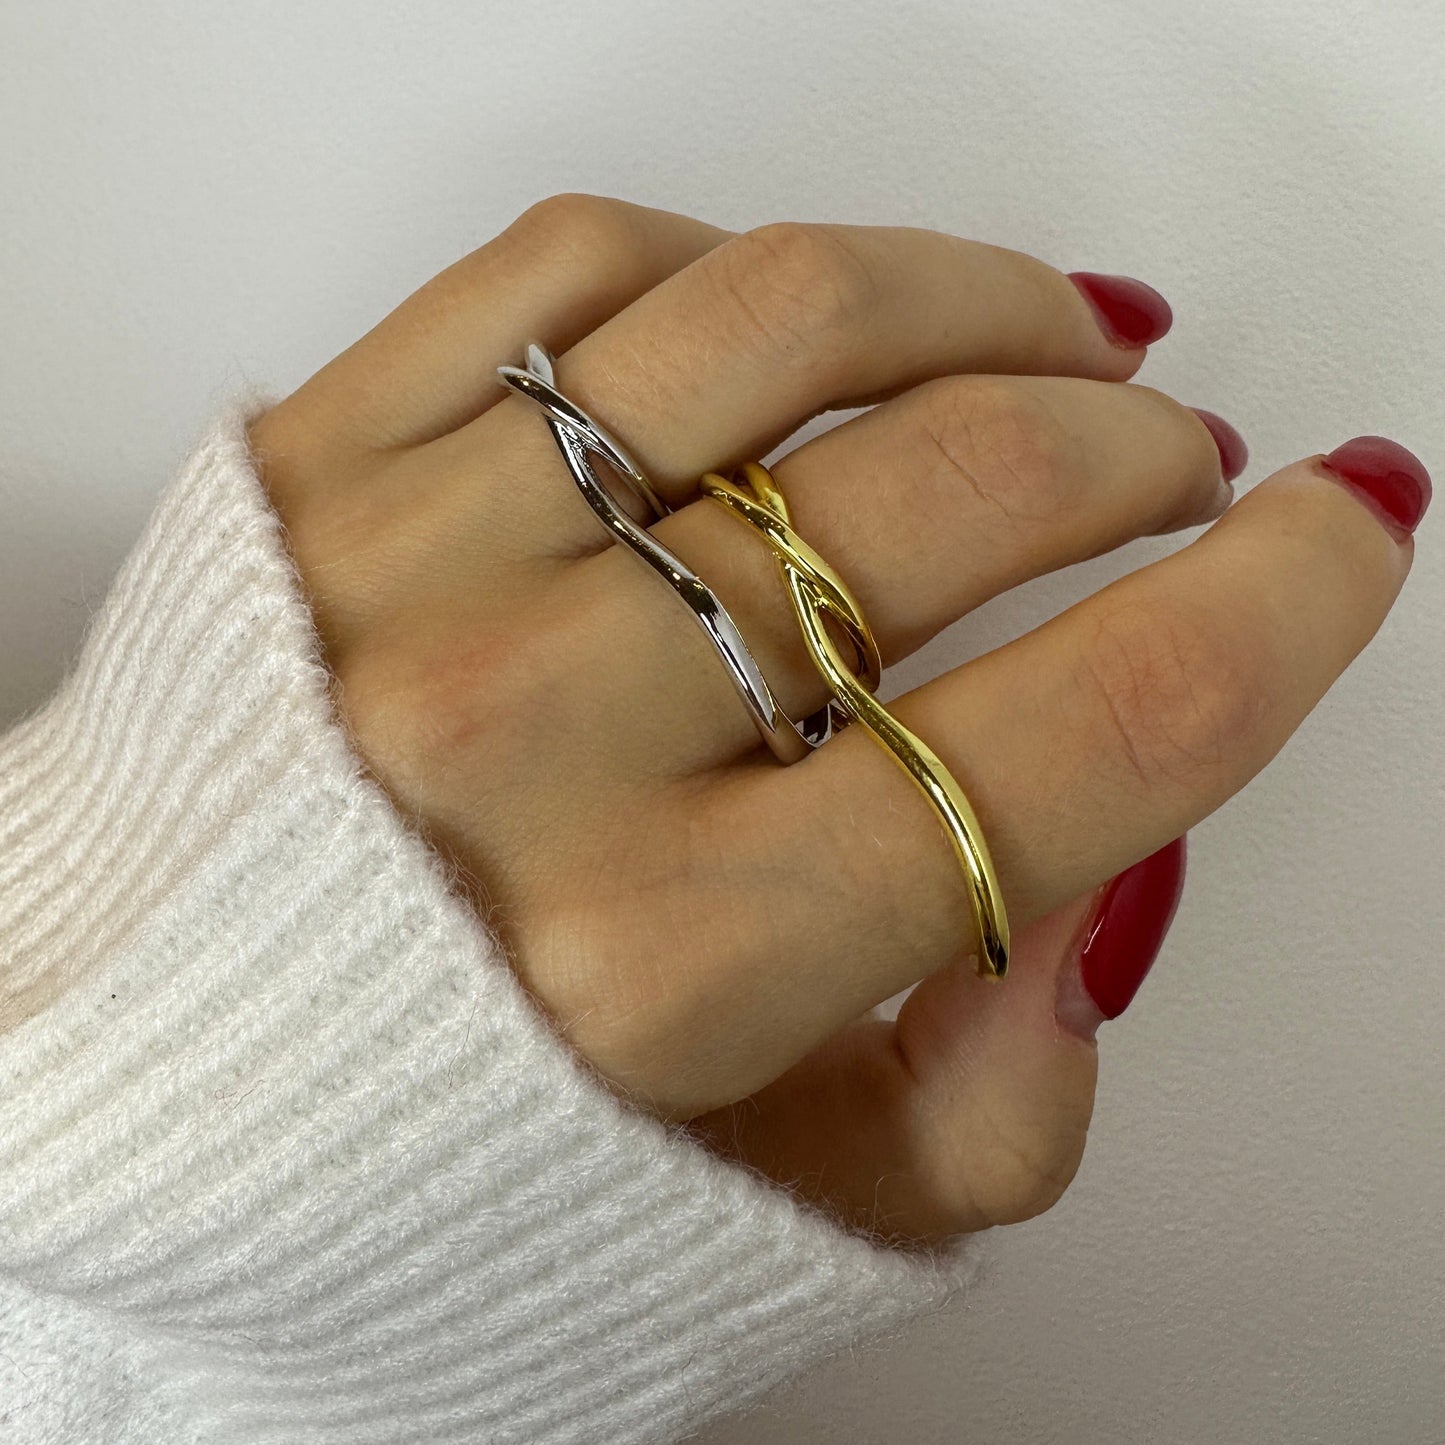 Silver and gold Two finger rings